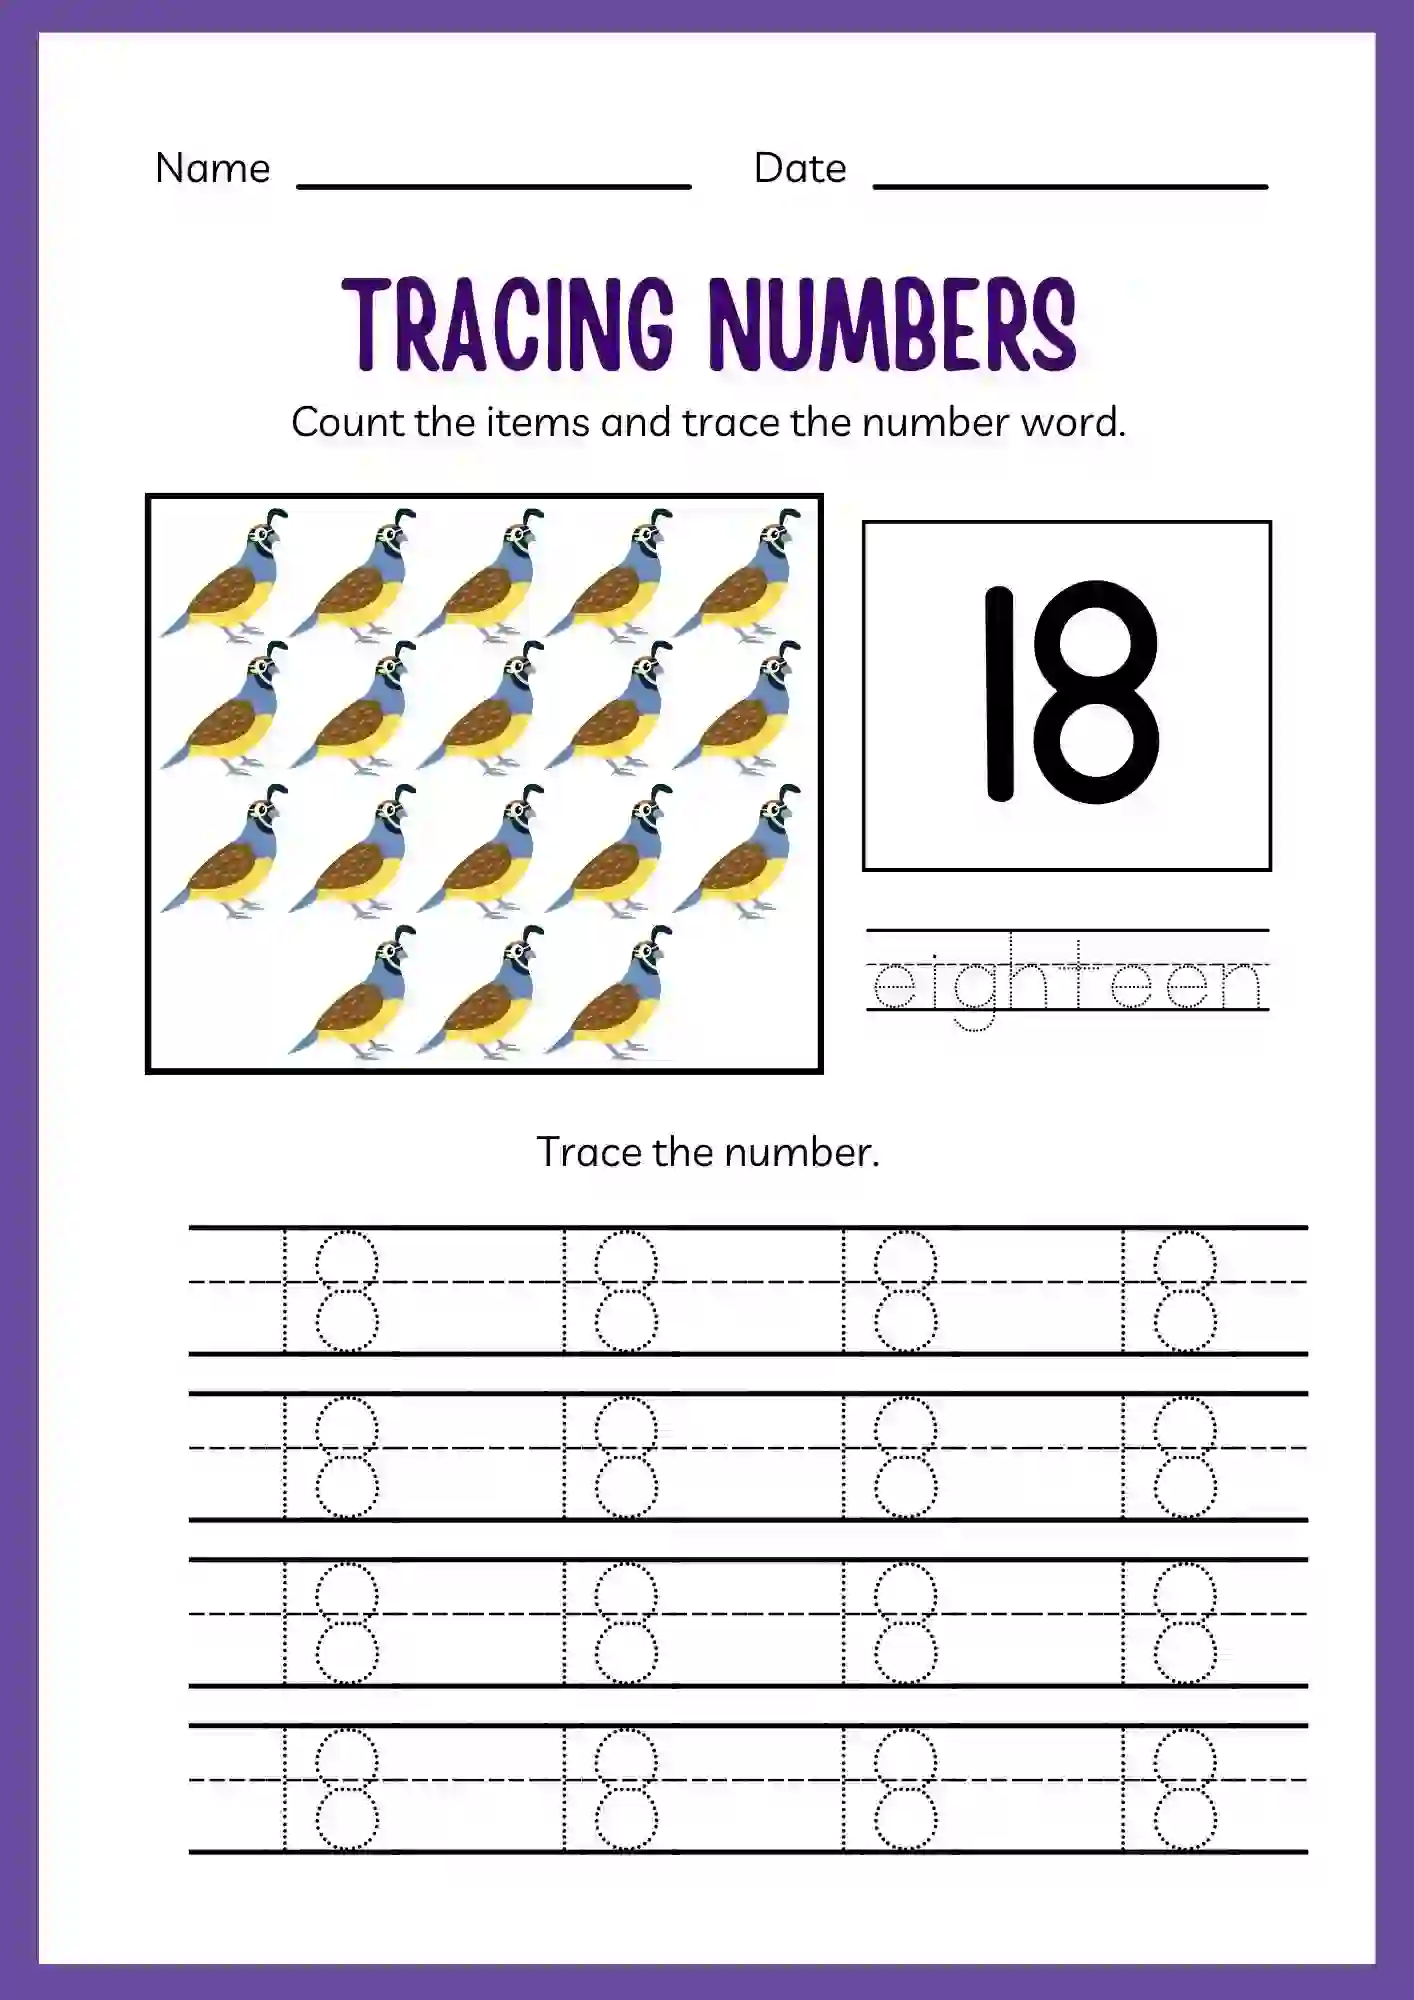 Number Tracing Worksheets 1 to 20 (Number 18 tracing sheet)